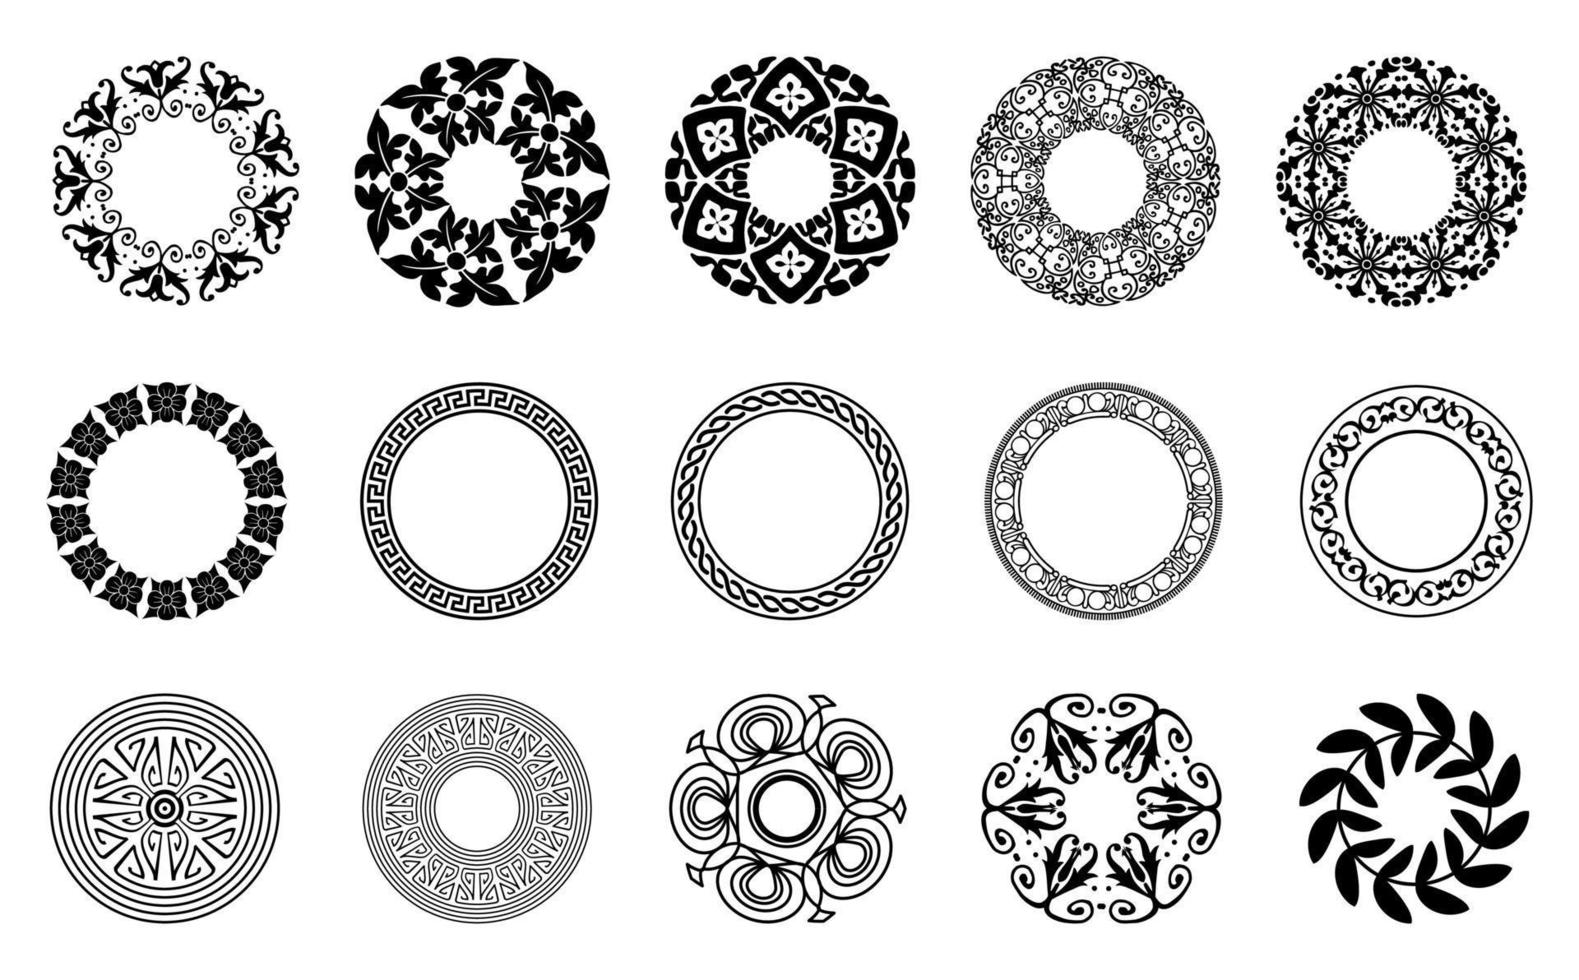 round shape mandala ornament set, vector transparent background good for a variety of design materials, backgrounds, invitations, posters, social media, templates